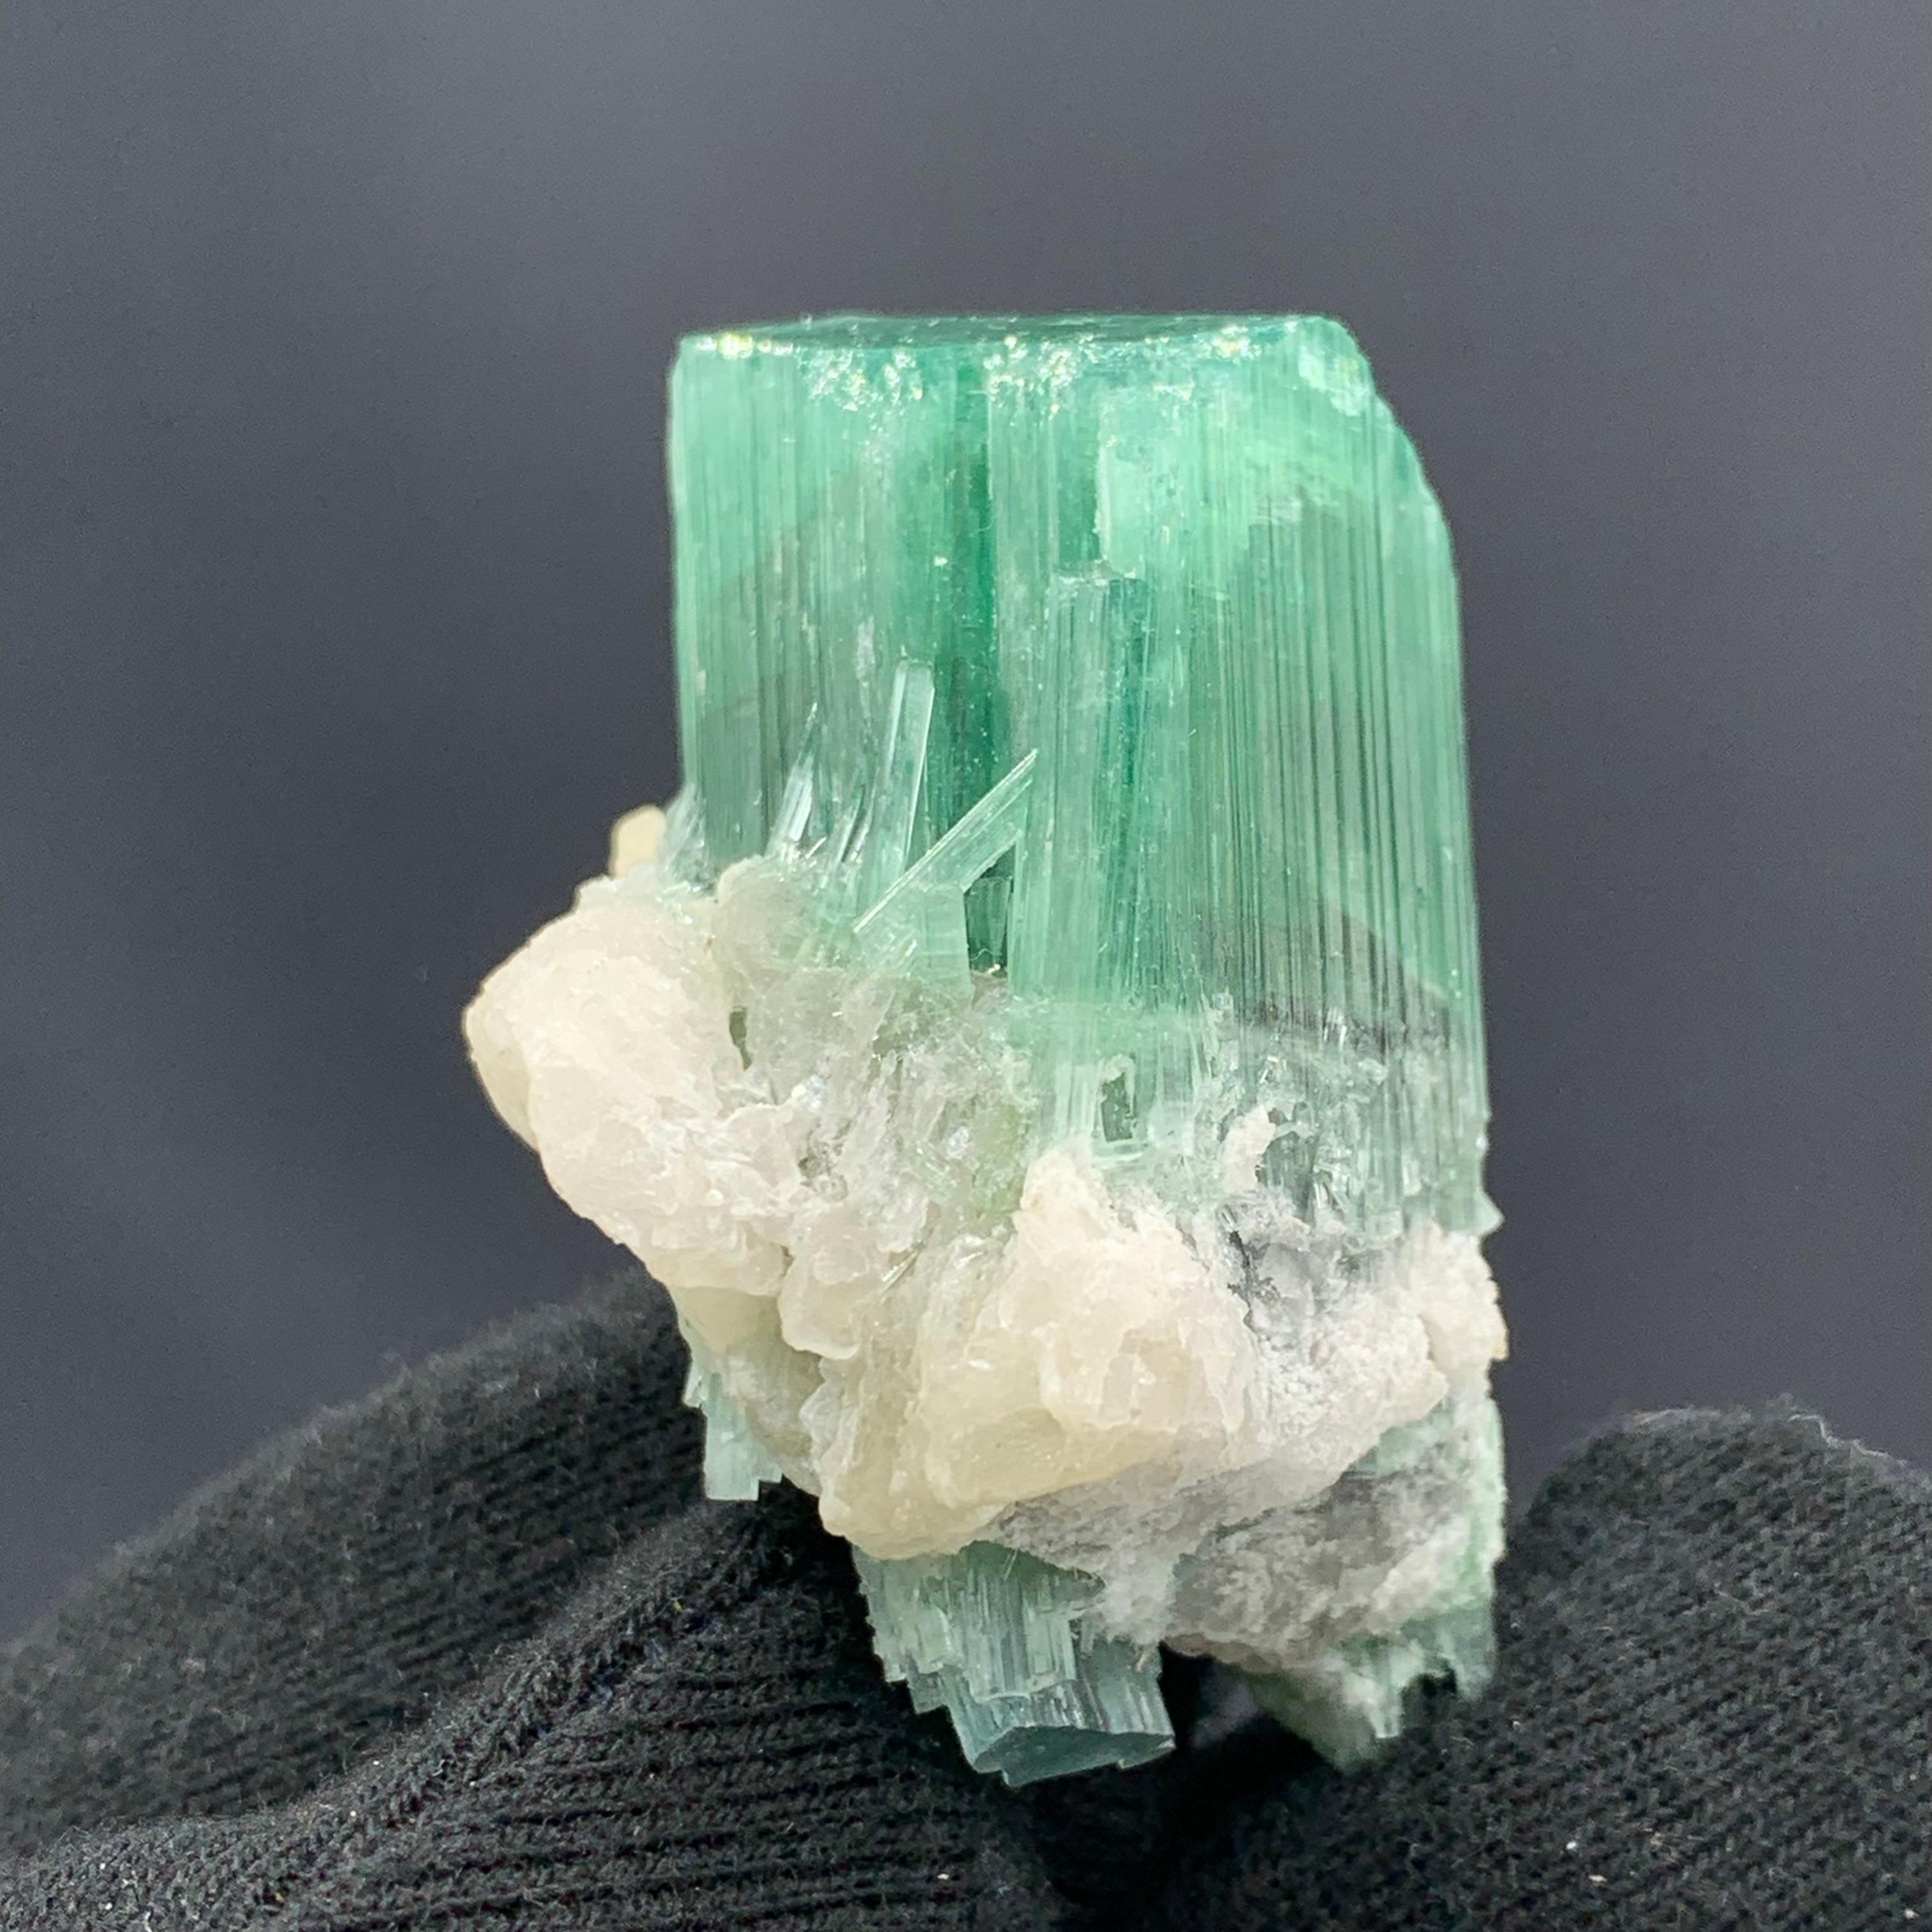 58.67 Gram Amazing Green Seafoam Tourmaline Specimen From Kunar, Afghanistan 

Weight: 58.67 Gram
Dimension: 5.1 x 3.4 x 3.1 Cm
Origin: Kunar, Afghanistan 

Tourmaline is a crystalline silicate mineral group in which boron is compounded with